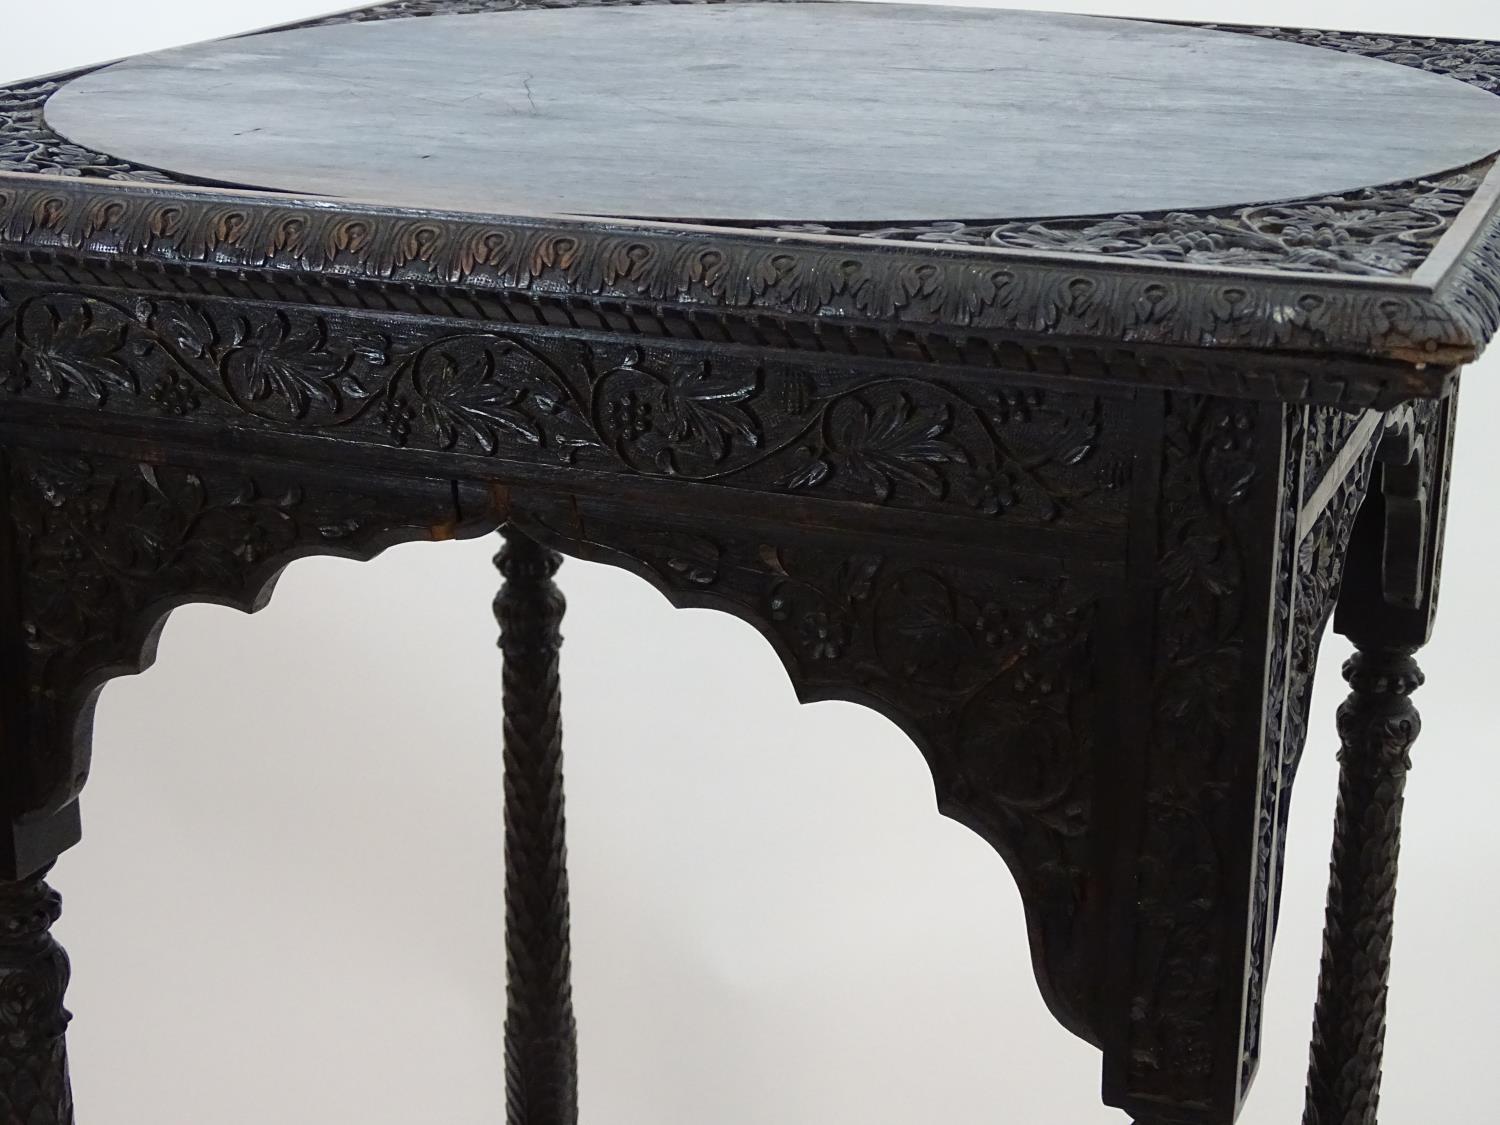 A 19thC rosewood mirror with a pierced and carved top and bottom, depicting anthemion in flower - Image 7 of 8